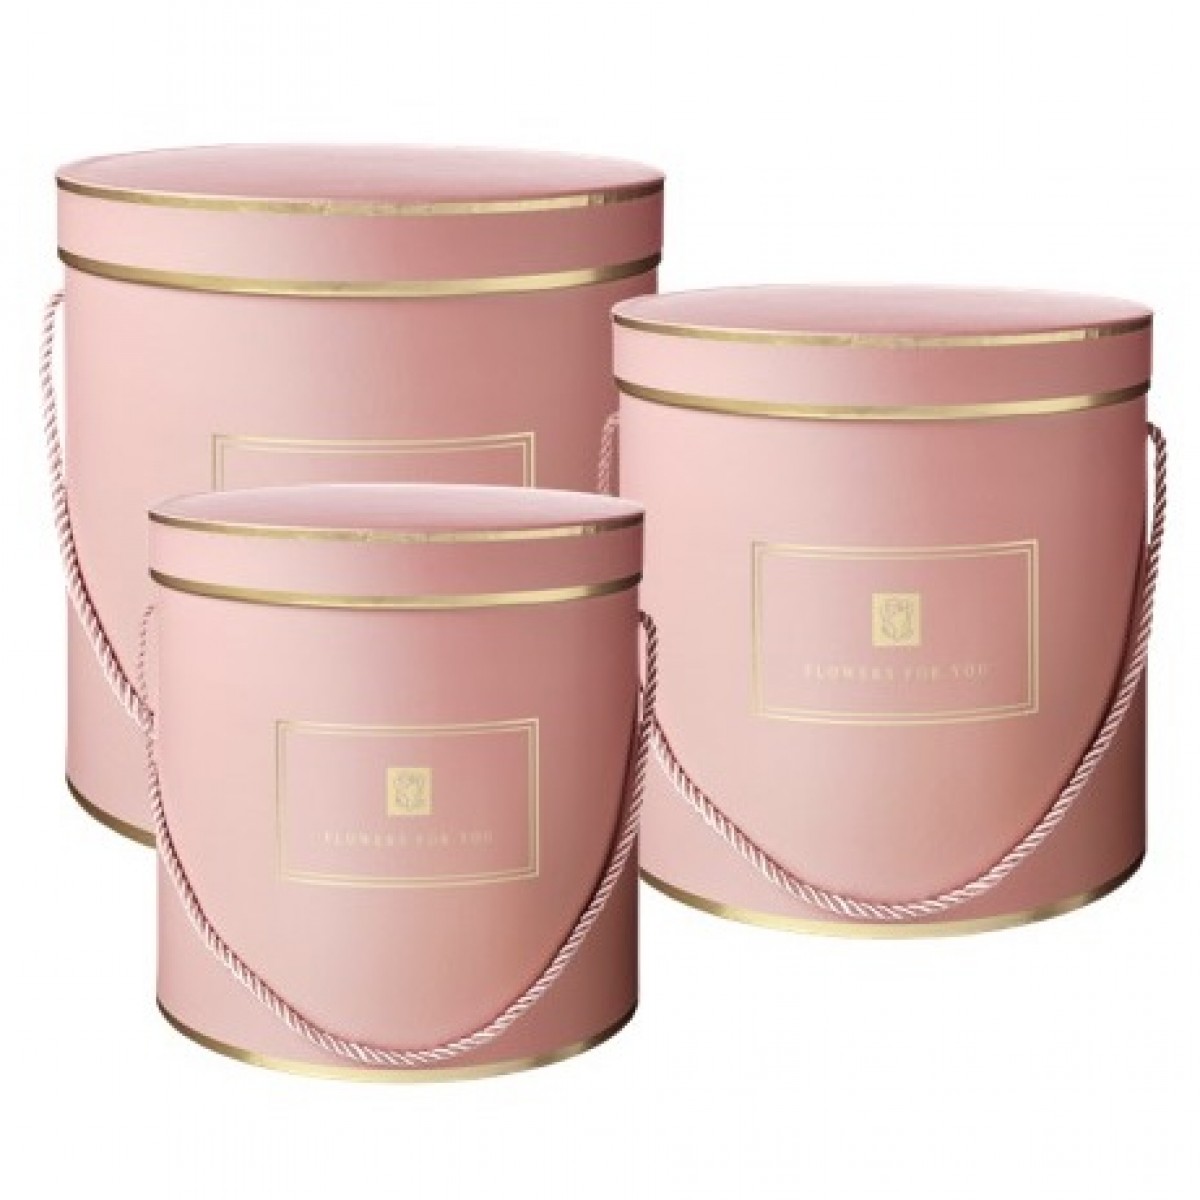 5030 Hamilton Cylinder Round Paper Box Lined Pink/Gold  - Set of 3